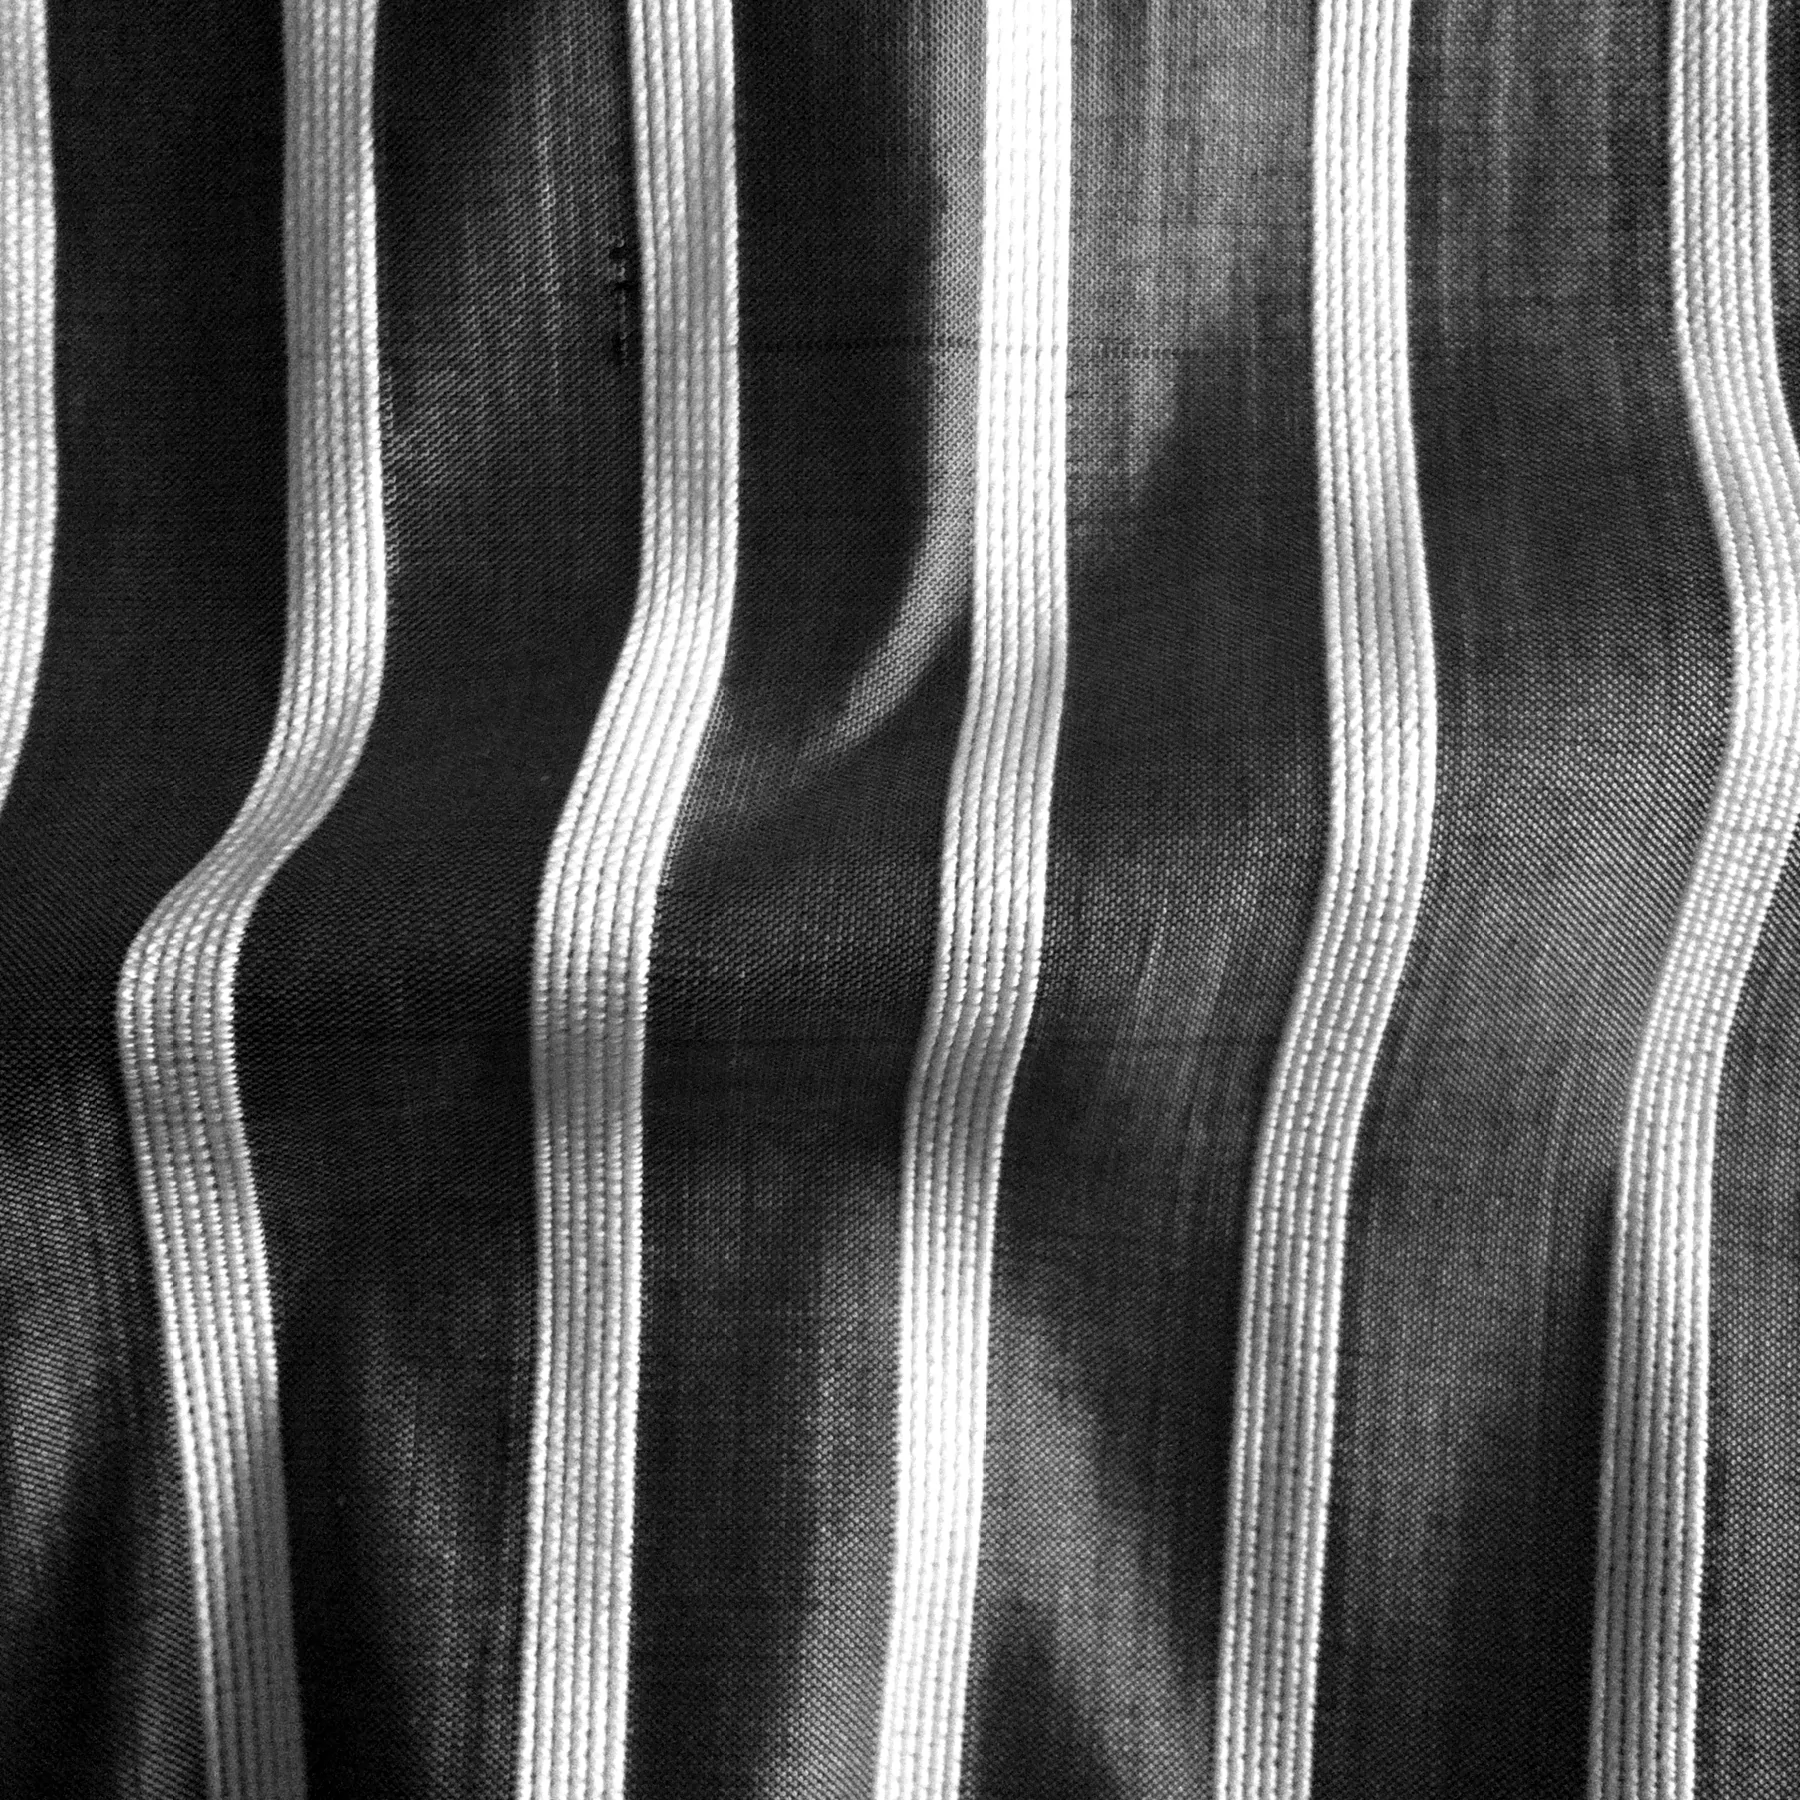 Hand-woven Silk experimentation with insertion of different types of cords.